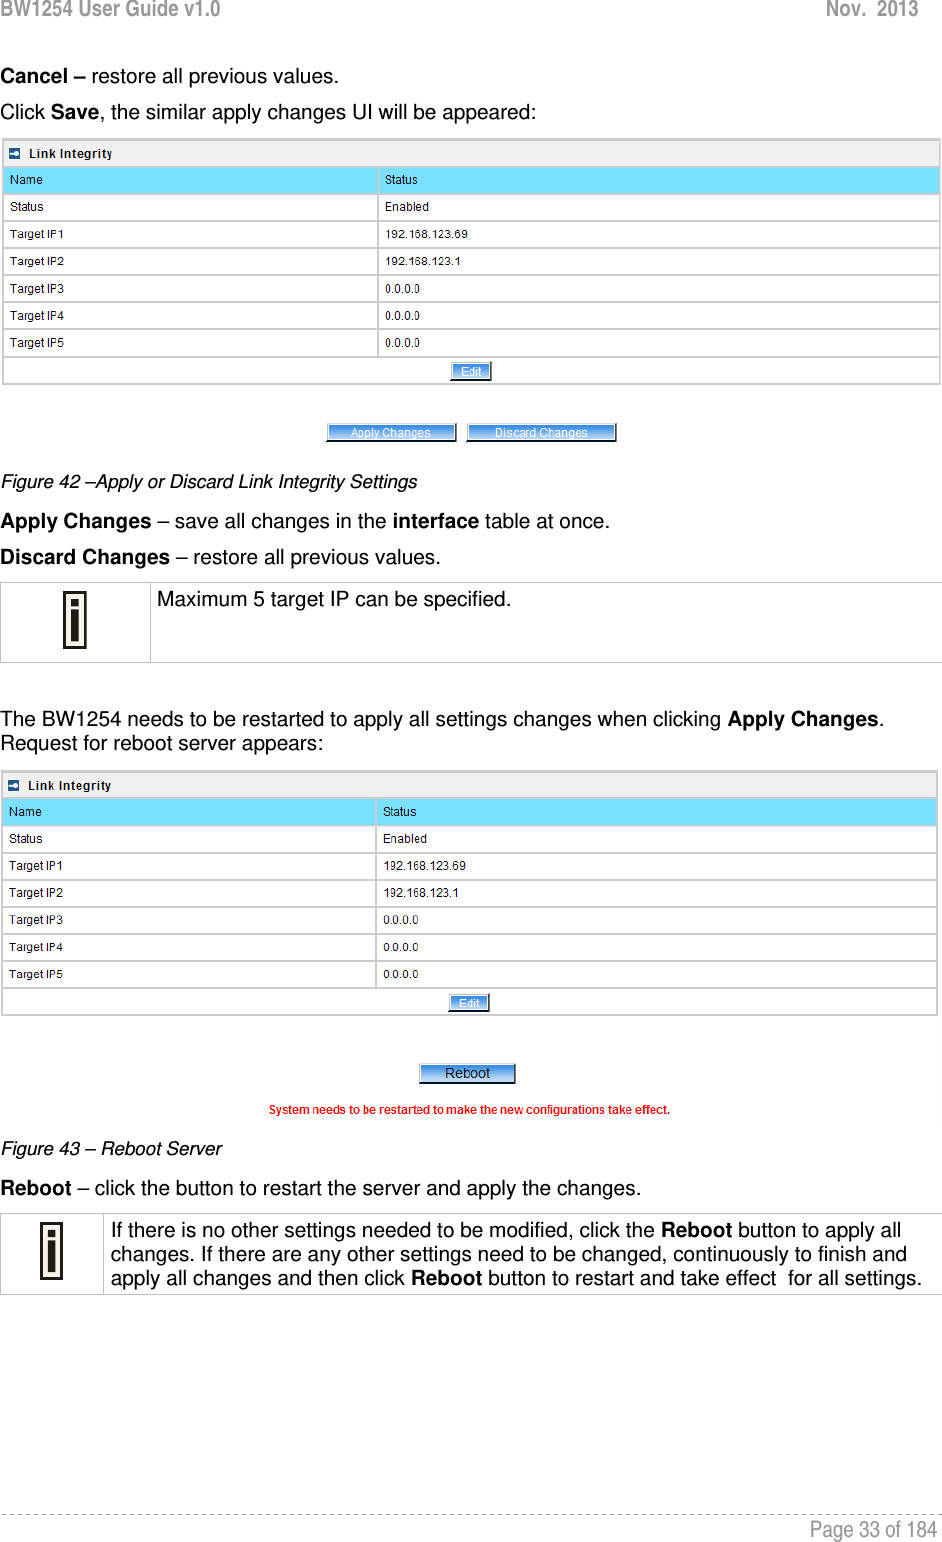 BW1254 User Guide v1.0  Nov.  2013     Page 33 of 184   Cancel – restore all previous values. Click Save, the similar apply changes UI will be appeared:  Figure 42 –Apply or Discard Link Integrity Settings Apply Changes – save all changes in the interface table at once. Discard Changes – restore all previous values.  Maximum 5 target IP can be specified.  The BW1254 needs to be restarted to apply all settings changes when clicking Apply Changes. Request for reboot server appears:  Figure 43 – Reboot Server Reboot – click the button to restart the server and apply the changes.  If there is no other settings needed to be modified, click the Reboot button to apply all changes. If there are any other settings need to be changed, continuously to finish and apply all changes and then click Reboot button to restart and take effect  for all settings.     